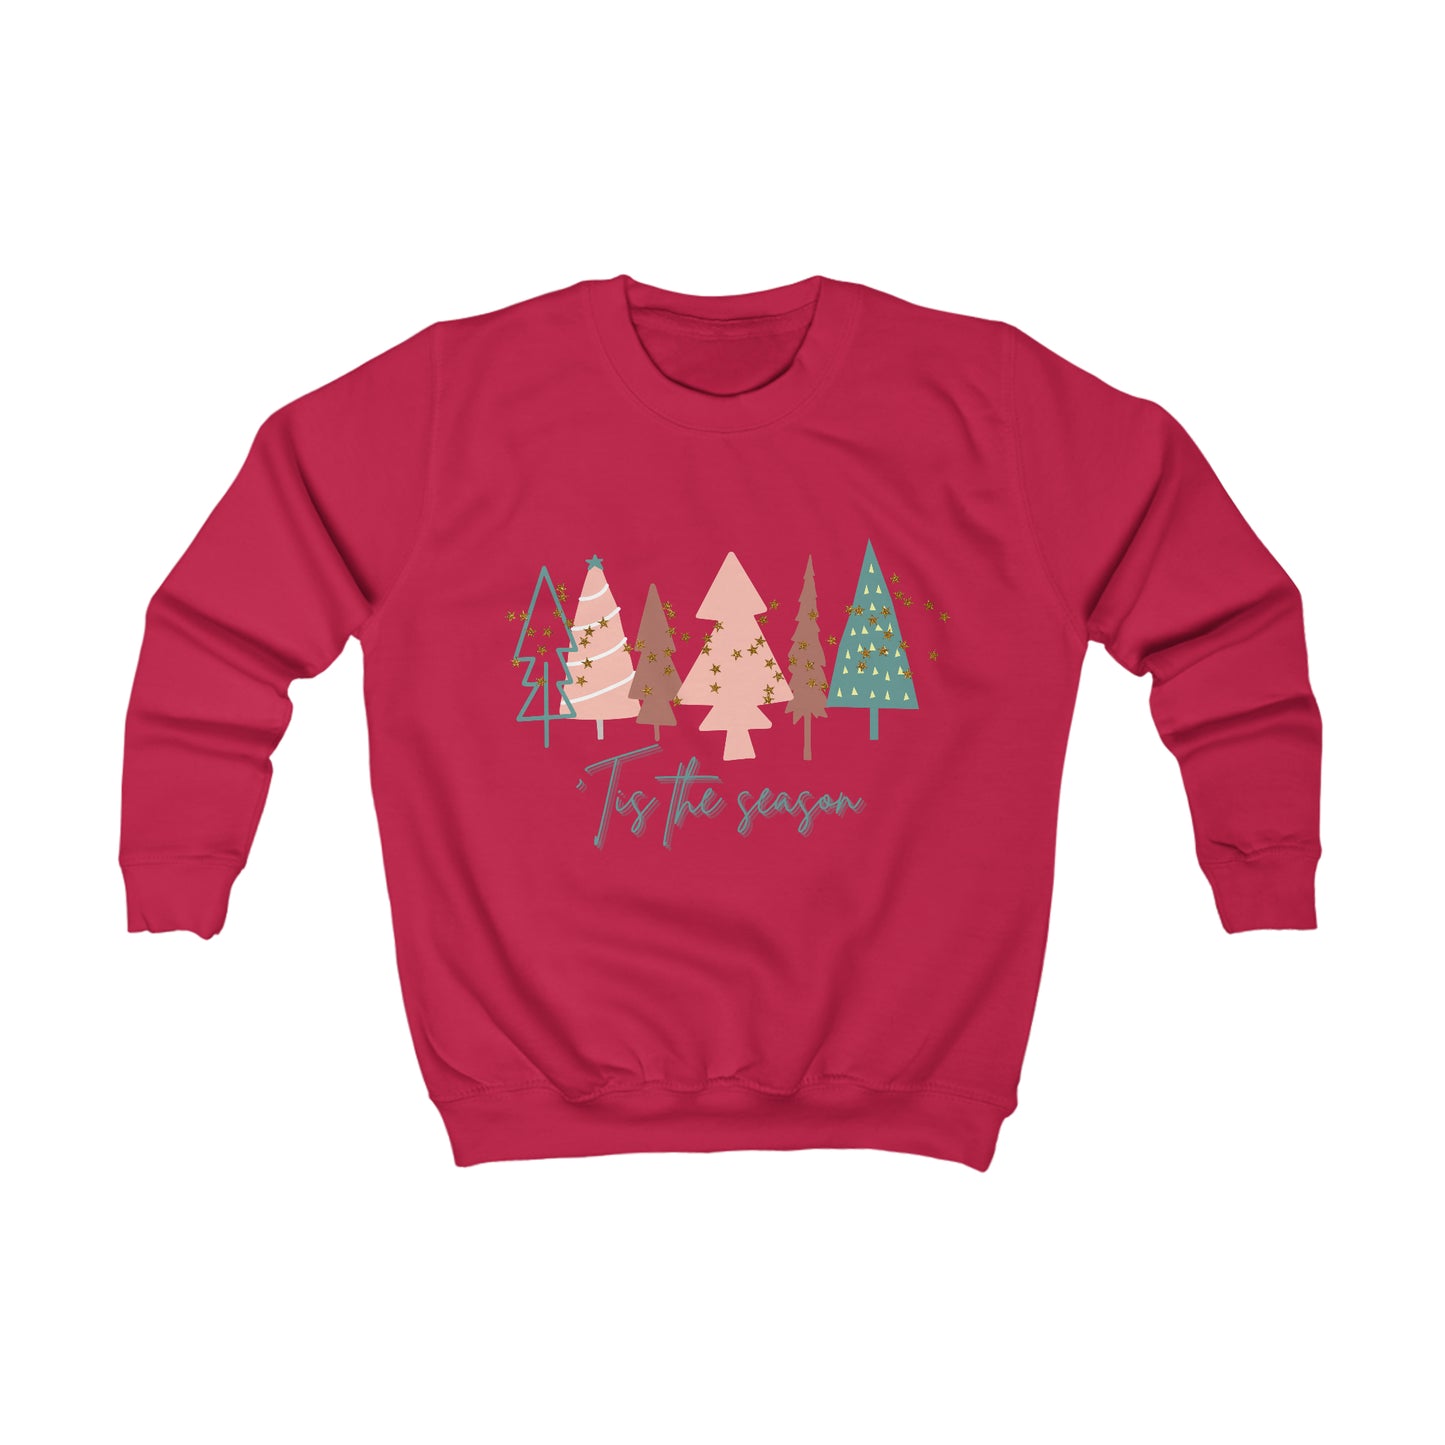 A cozy red Youth Sweatshirt with christmas trees on it, perfect for the winter months. This Christmas Sweatshirt from Printify is a great option for keeping your kids warm and stylish during the holiday season.